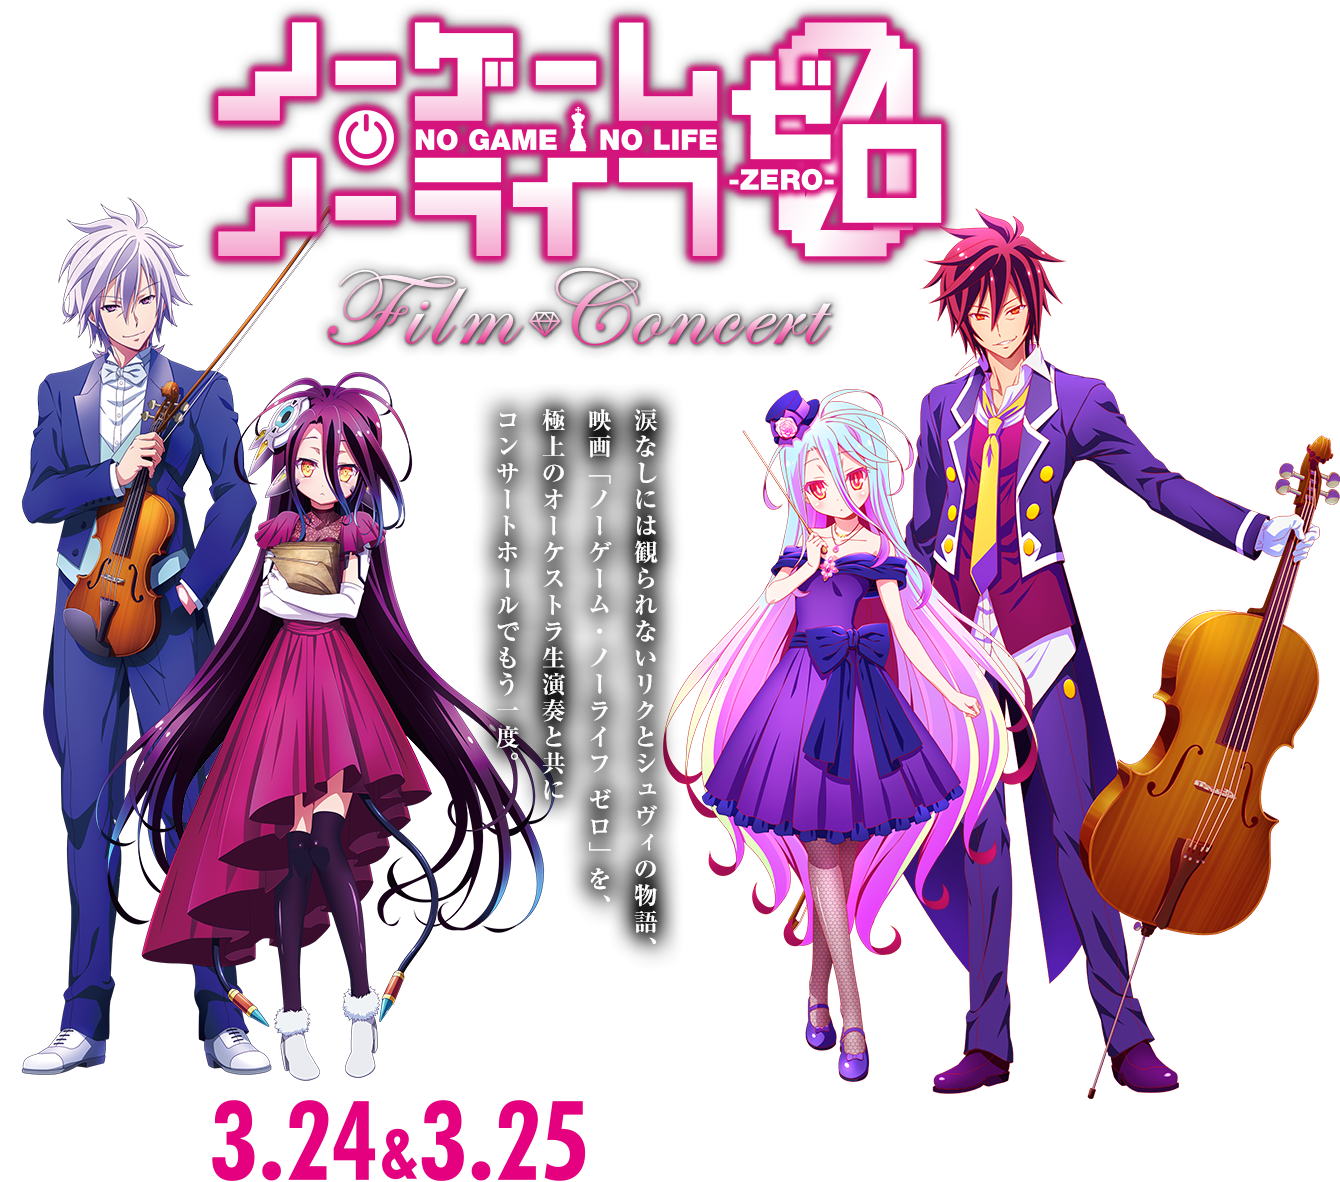 Download Ngnl 0 Concert No Game No Life 空 そら Tシャツ 人類種 コスプレ衣装 高品質 新品 Cosplay Png Image With No Background Pngkey Com